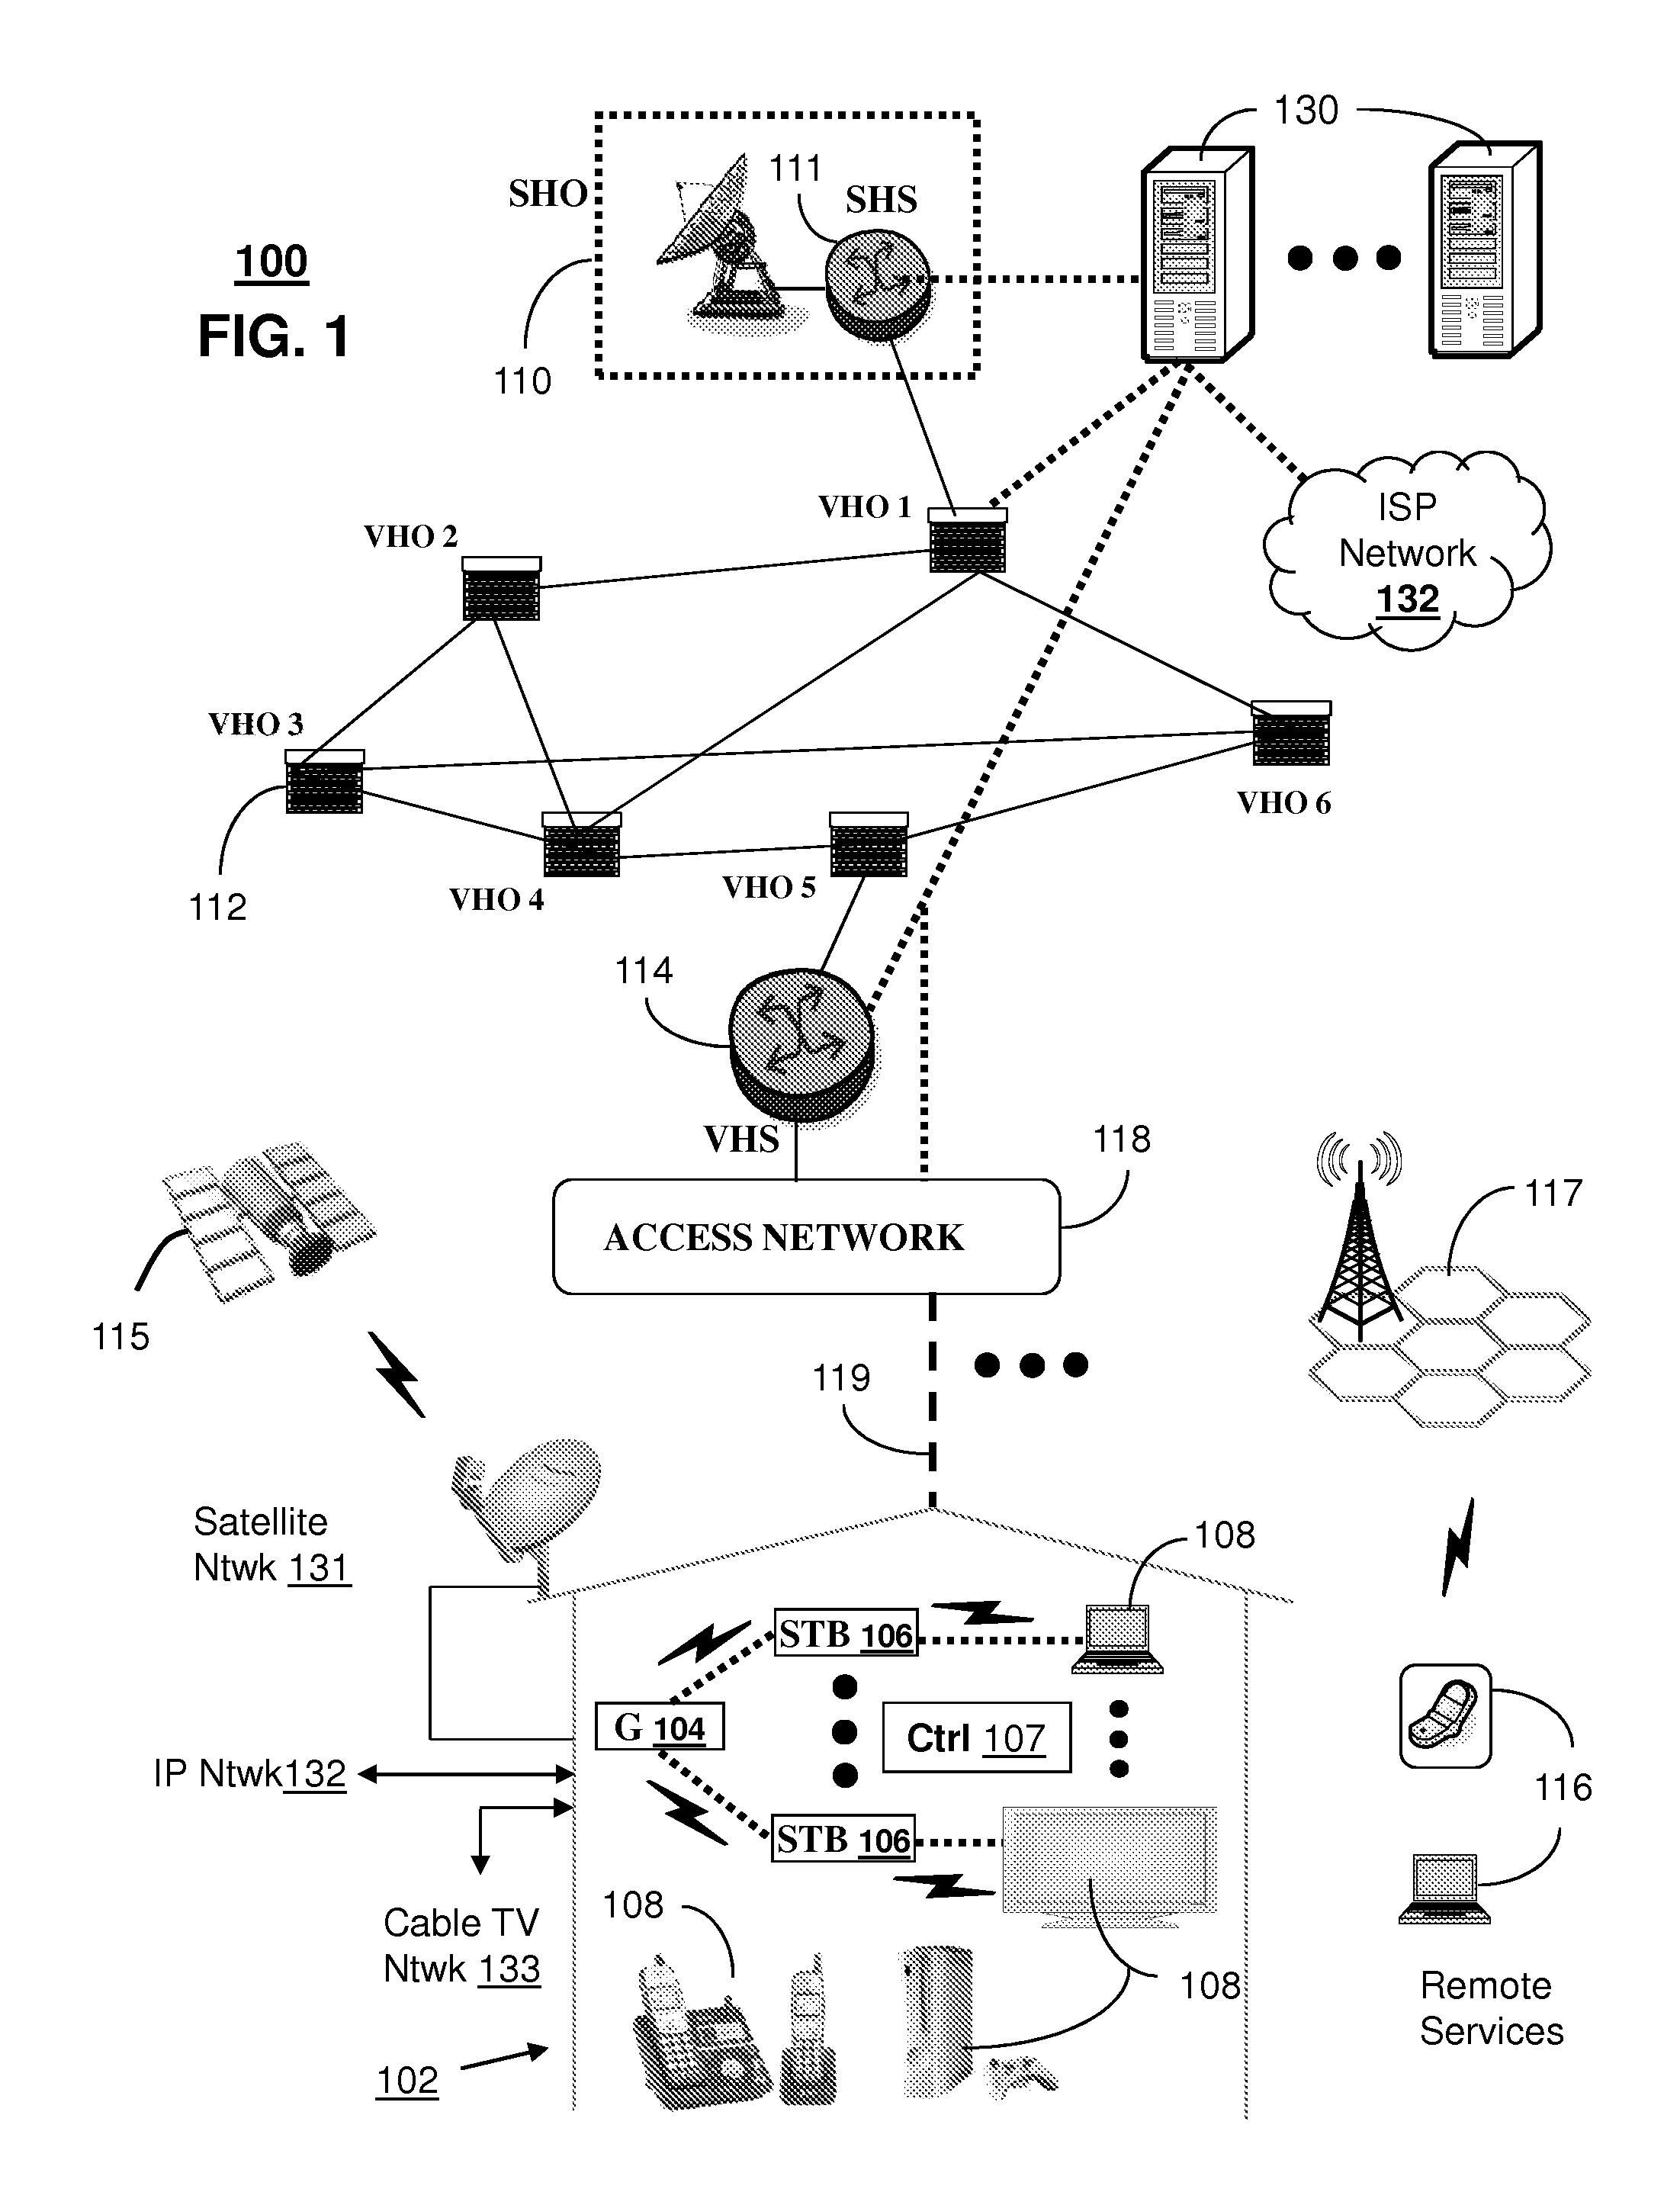 Method for detecting a viewing apparatus